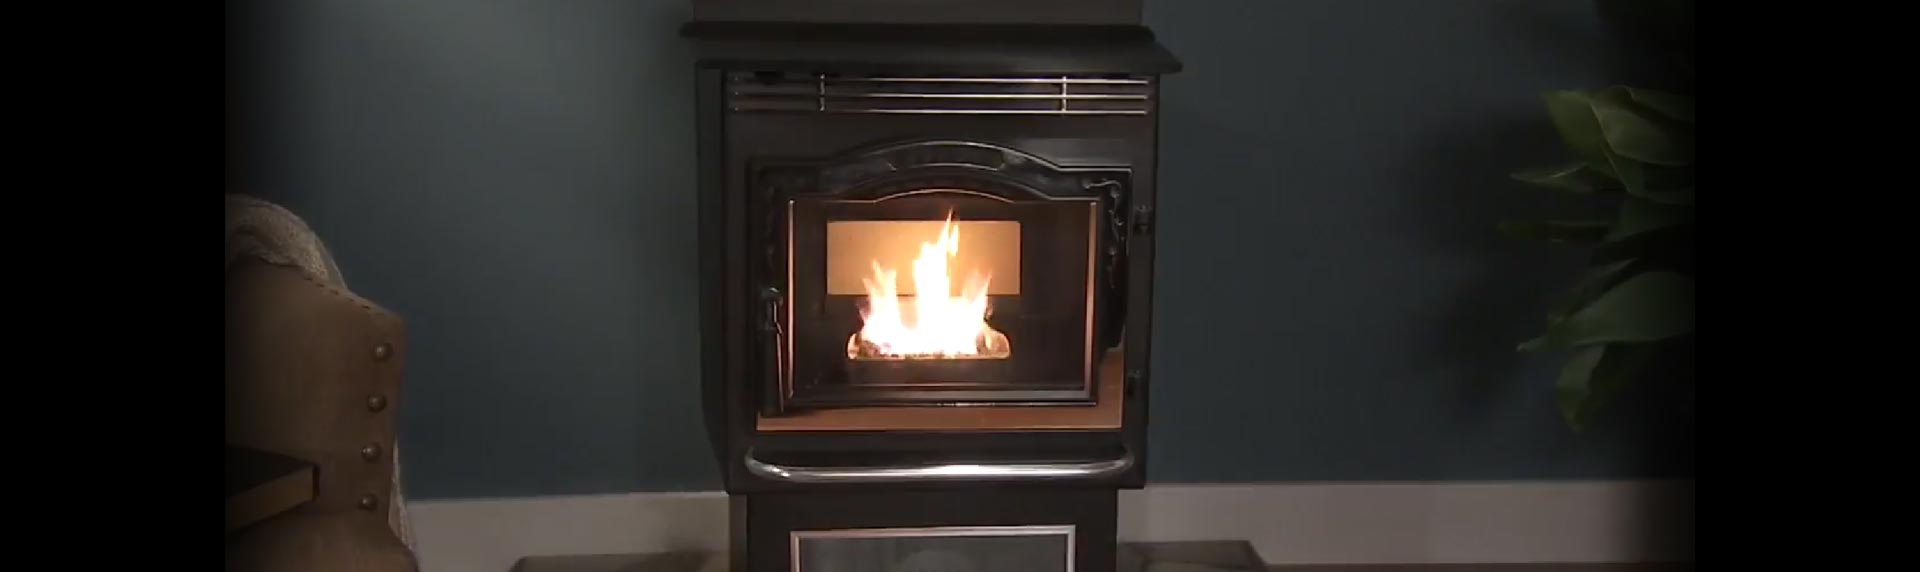 Traditional Pellet Stove set in a darkened living room